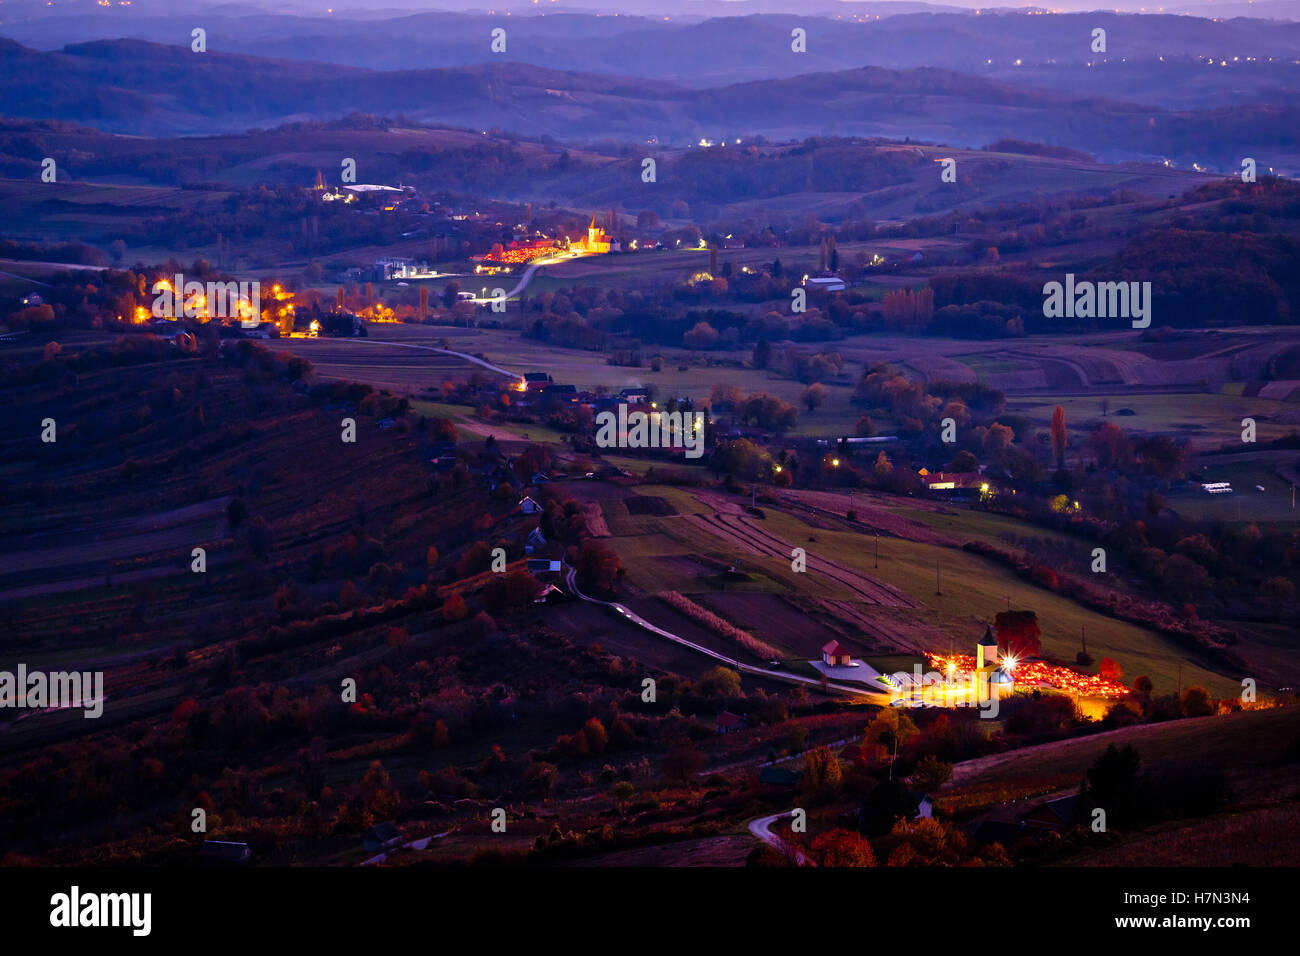 Evening view of villages and landscape of Prigorje region of Croatia Stock Photo